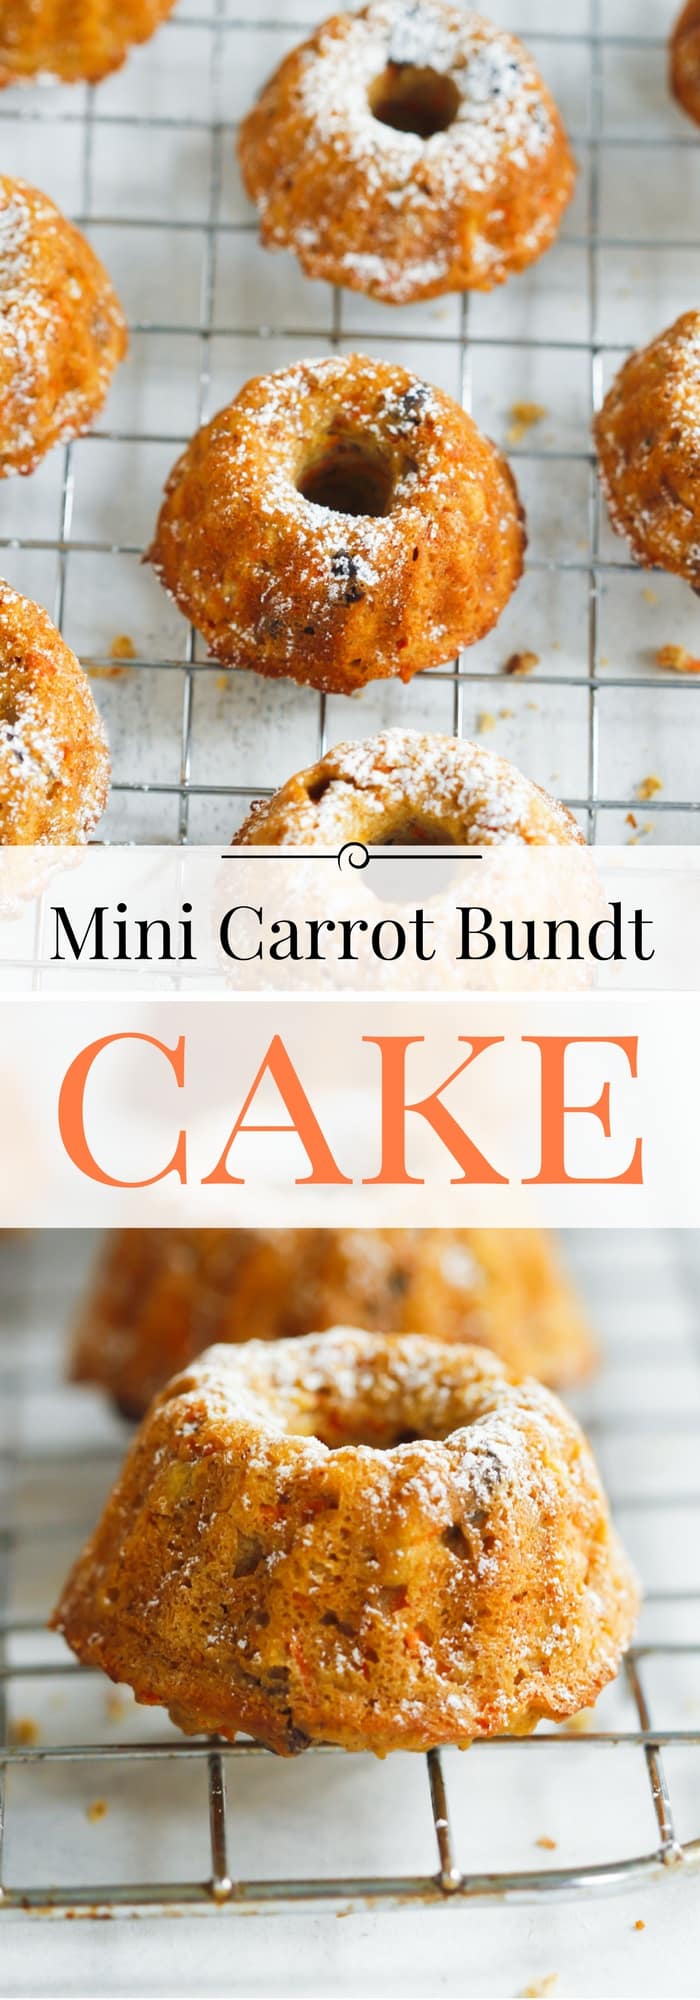 Mini Carrot Bundt Cake - This is the best healthier mini carrot bundt cake recipe ever. It’s very easy to make, perfectly spiced with cinnamon and nutmeg and delicious! | www.primaverakitchen.com